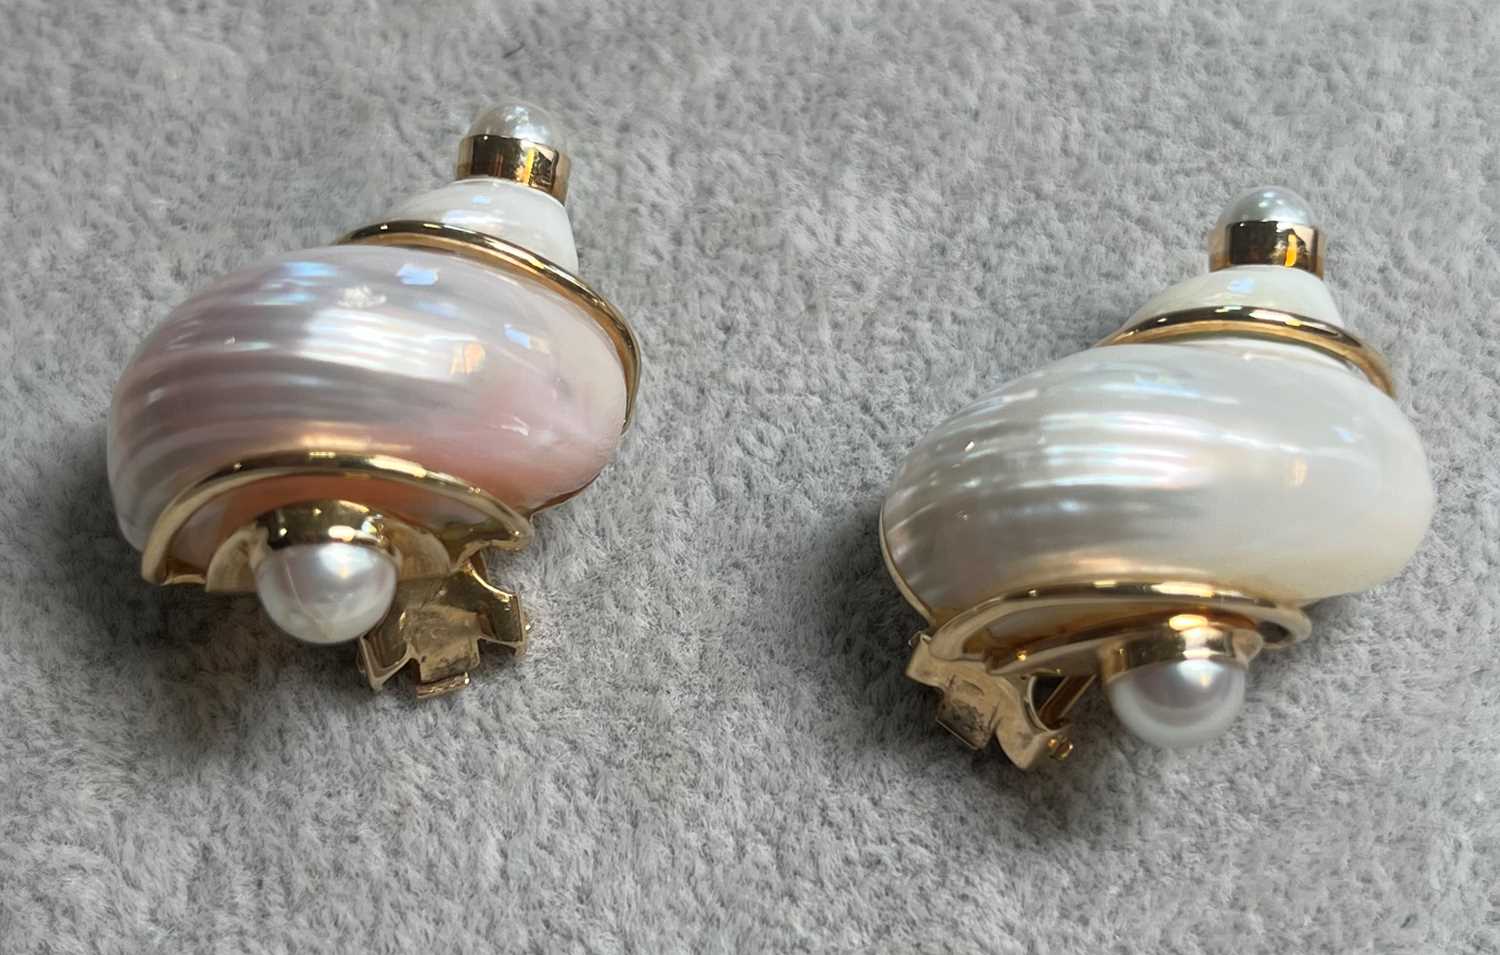 A pair of Turbo Shell clip earrings, by Seaman Schepps, - Image 5 of 5